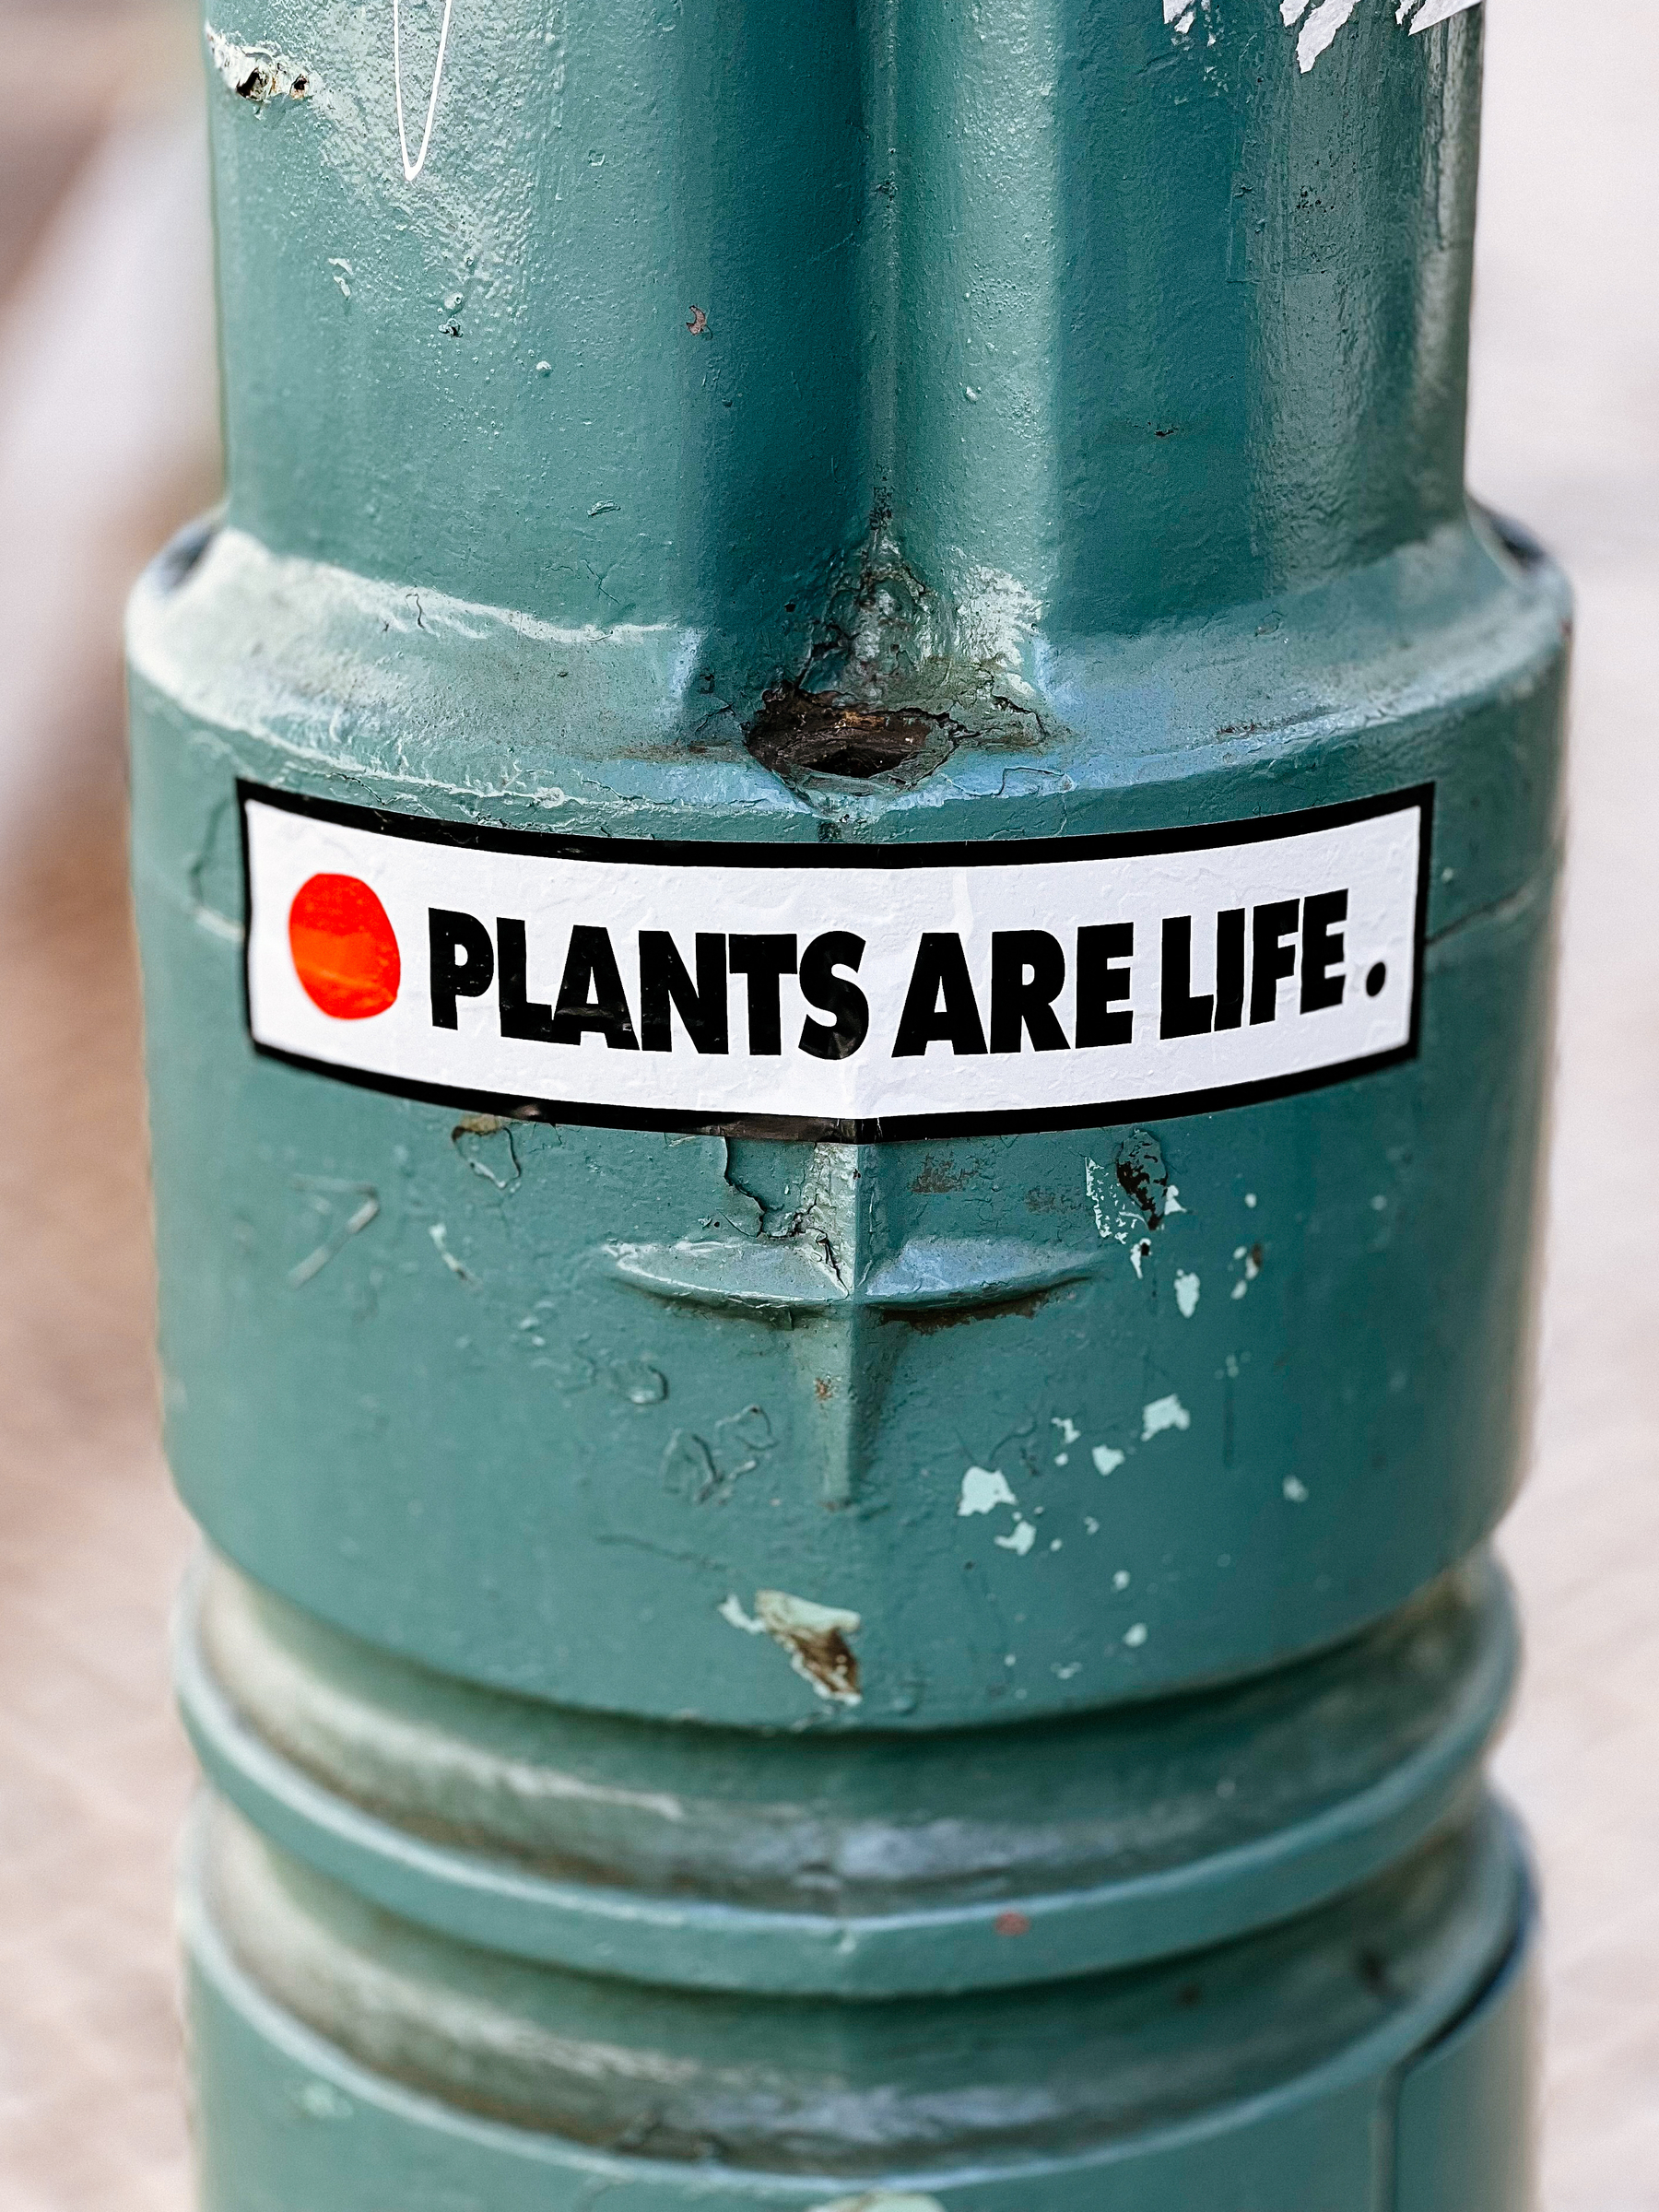 “Plants are life” sticker. Also, just beneath that, the lamp looks like the Orion browser logo. 